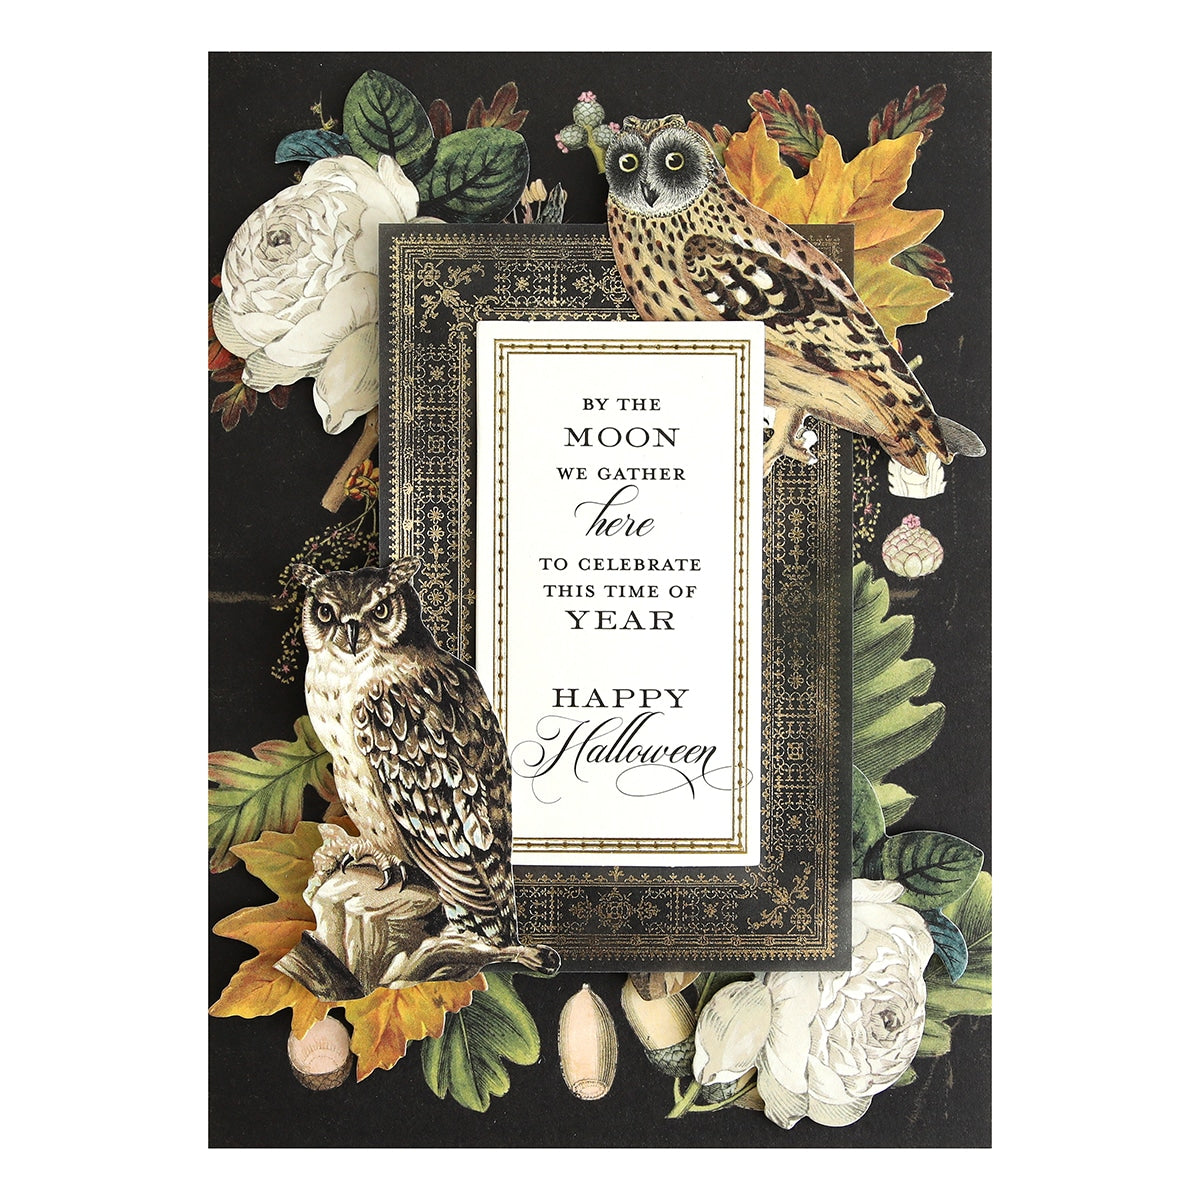 a picture frame with two owls and flowers.